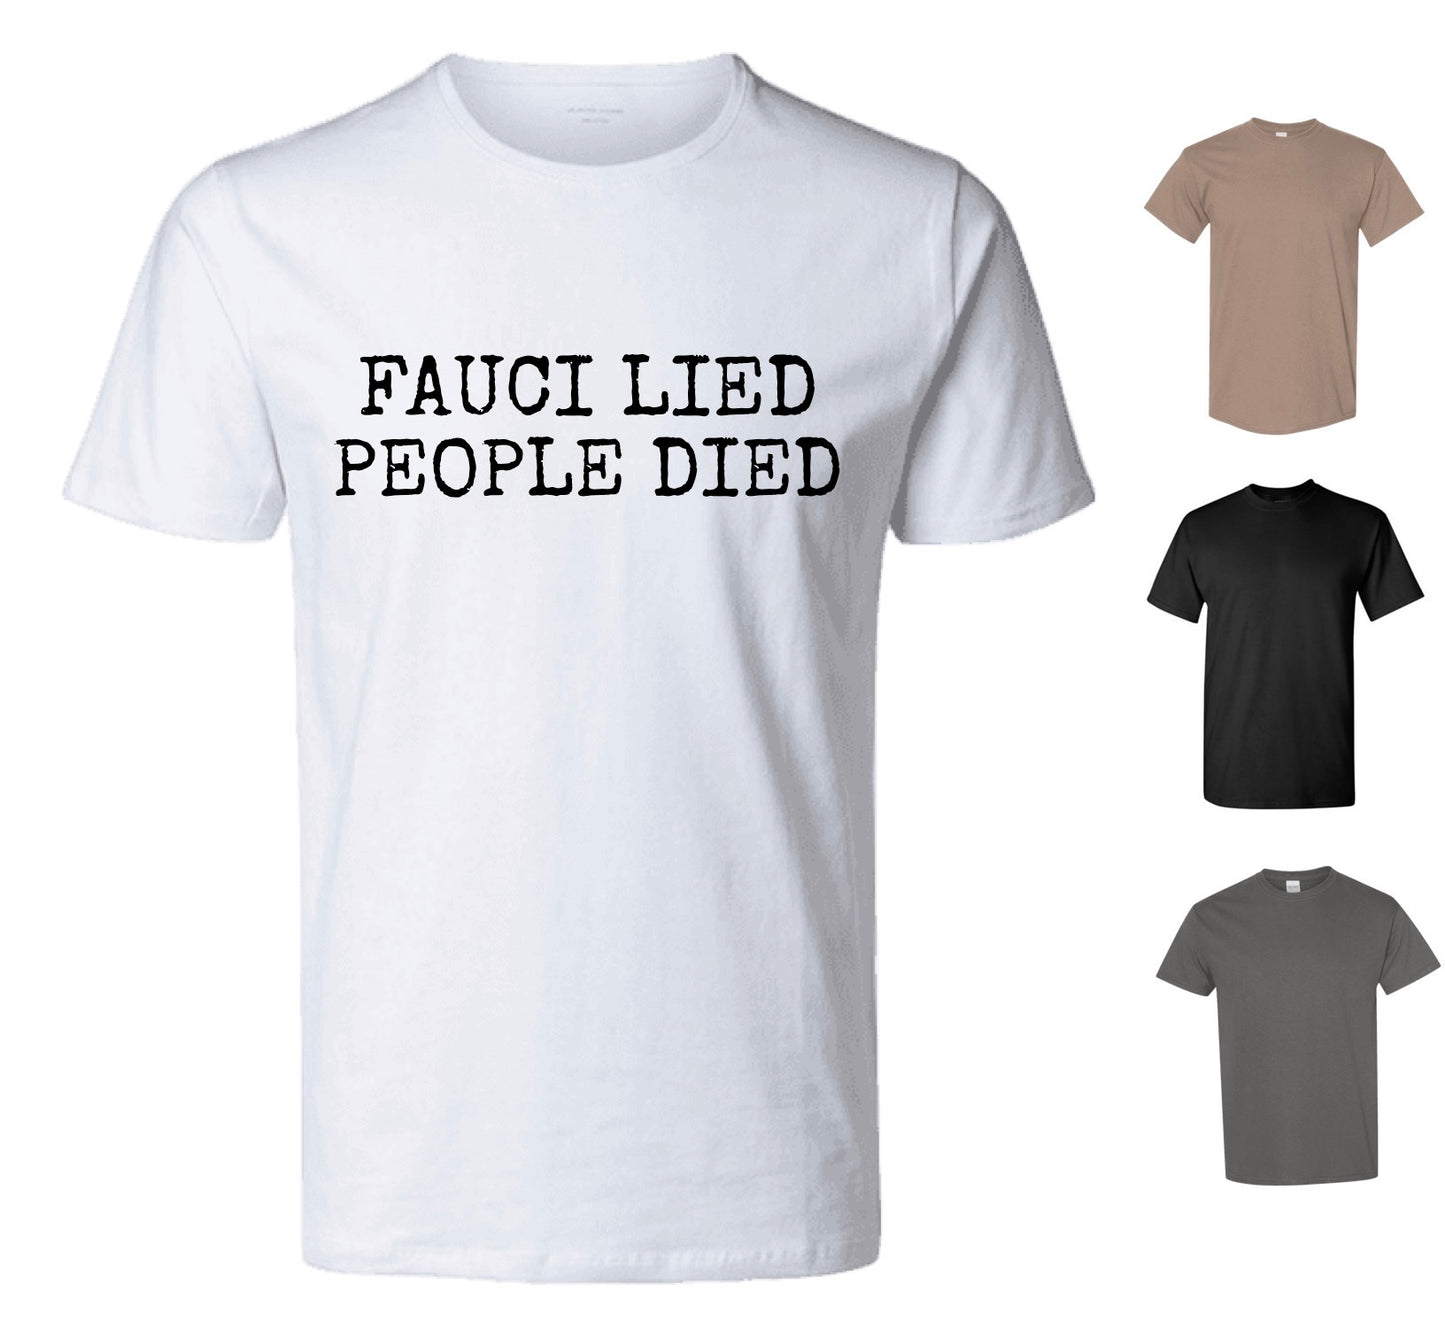 Fauci Lied, People Died T-Shirt